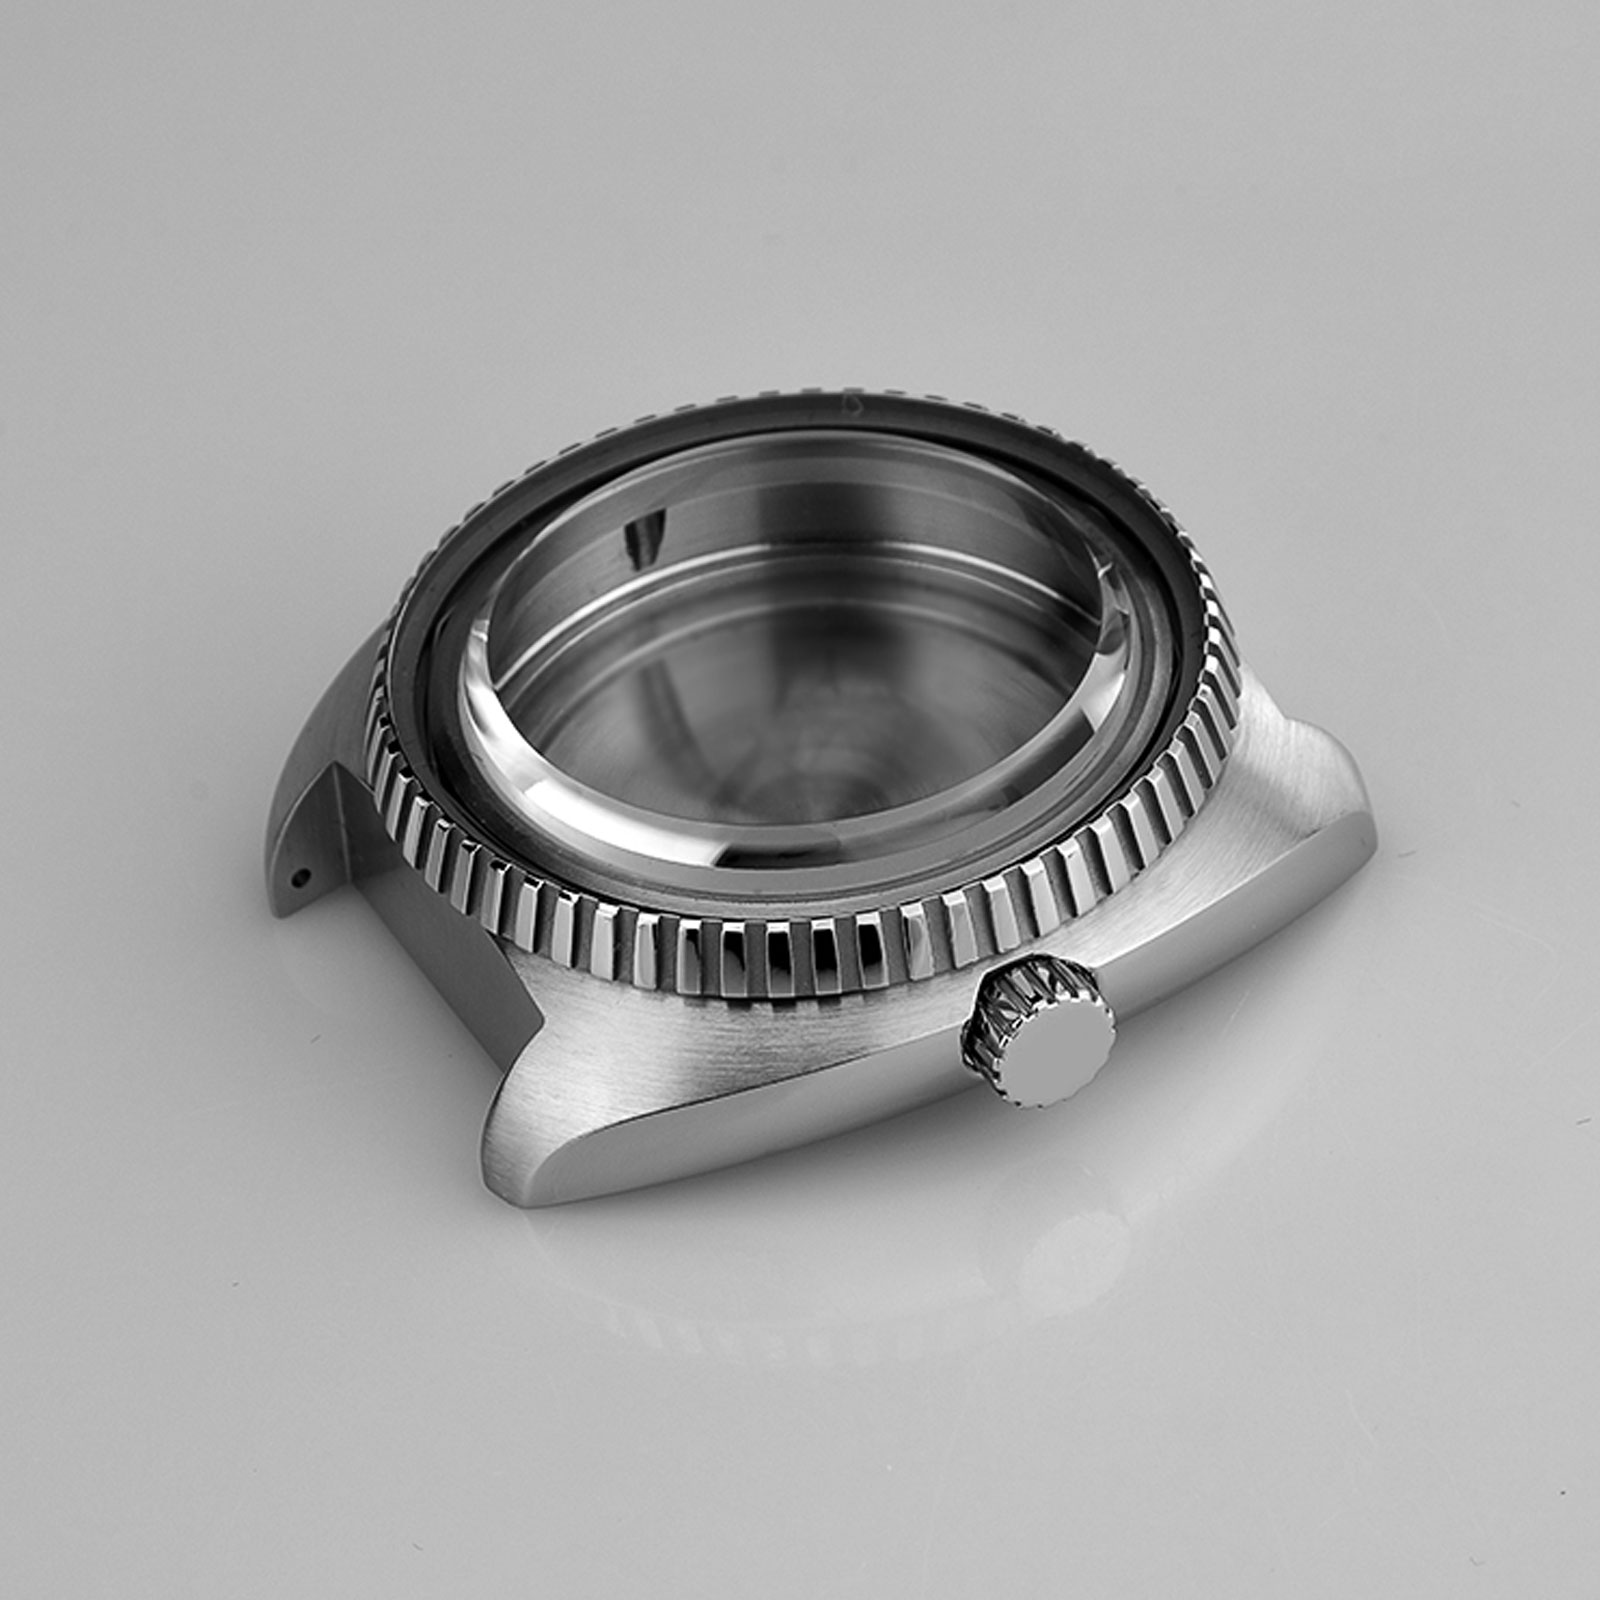 Simple Metal Watch Case With Large, Knurled Bezel